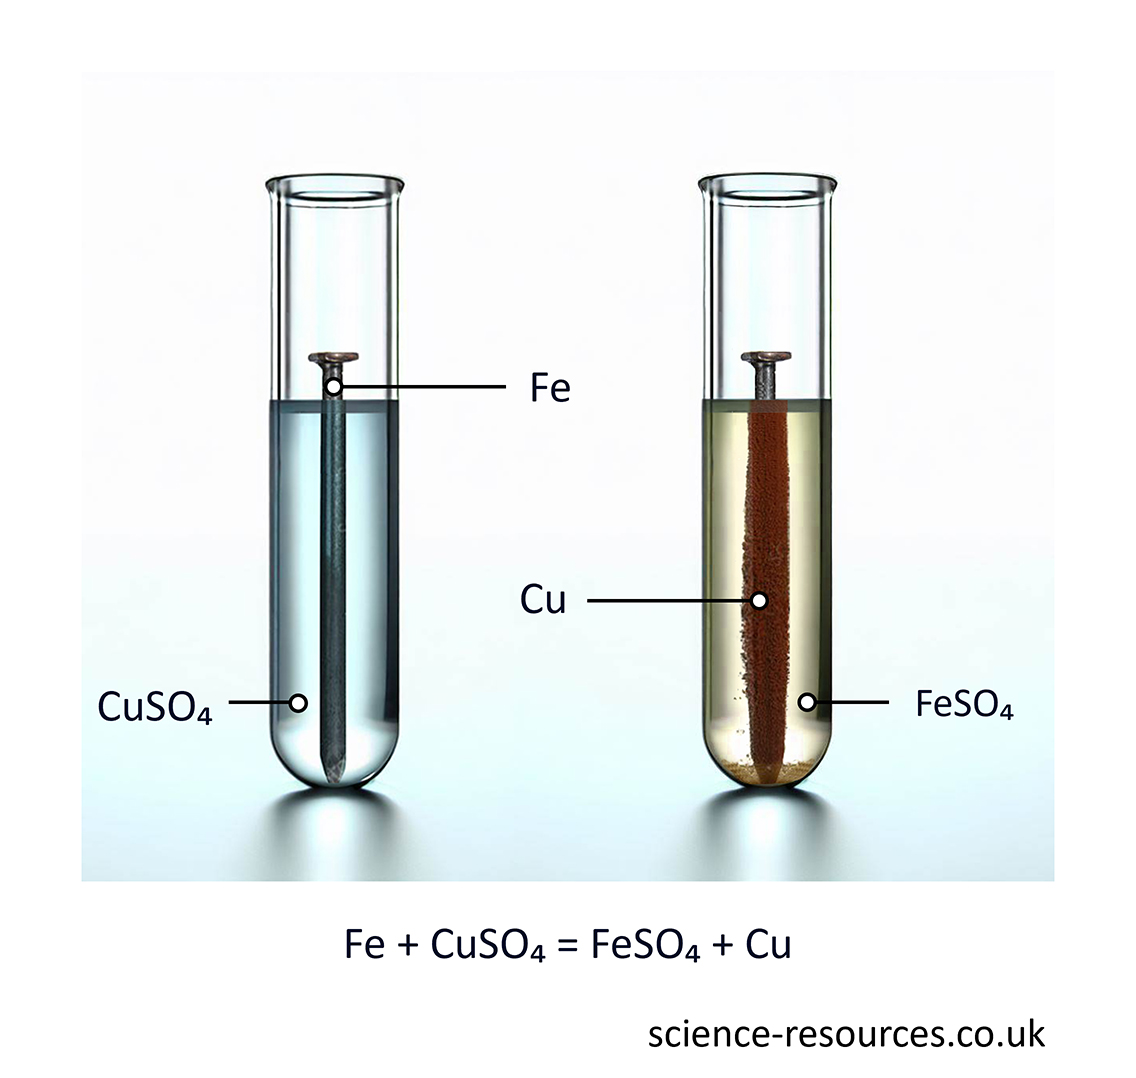 Image showing how iron displaces copper in copper sulfate